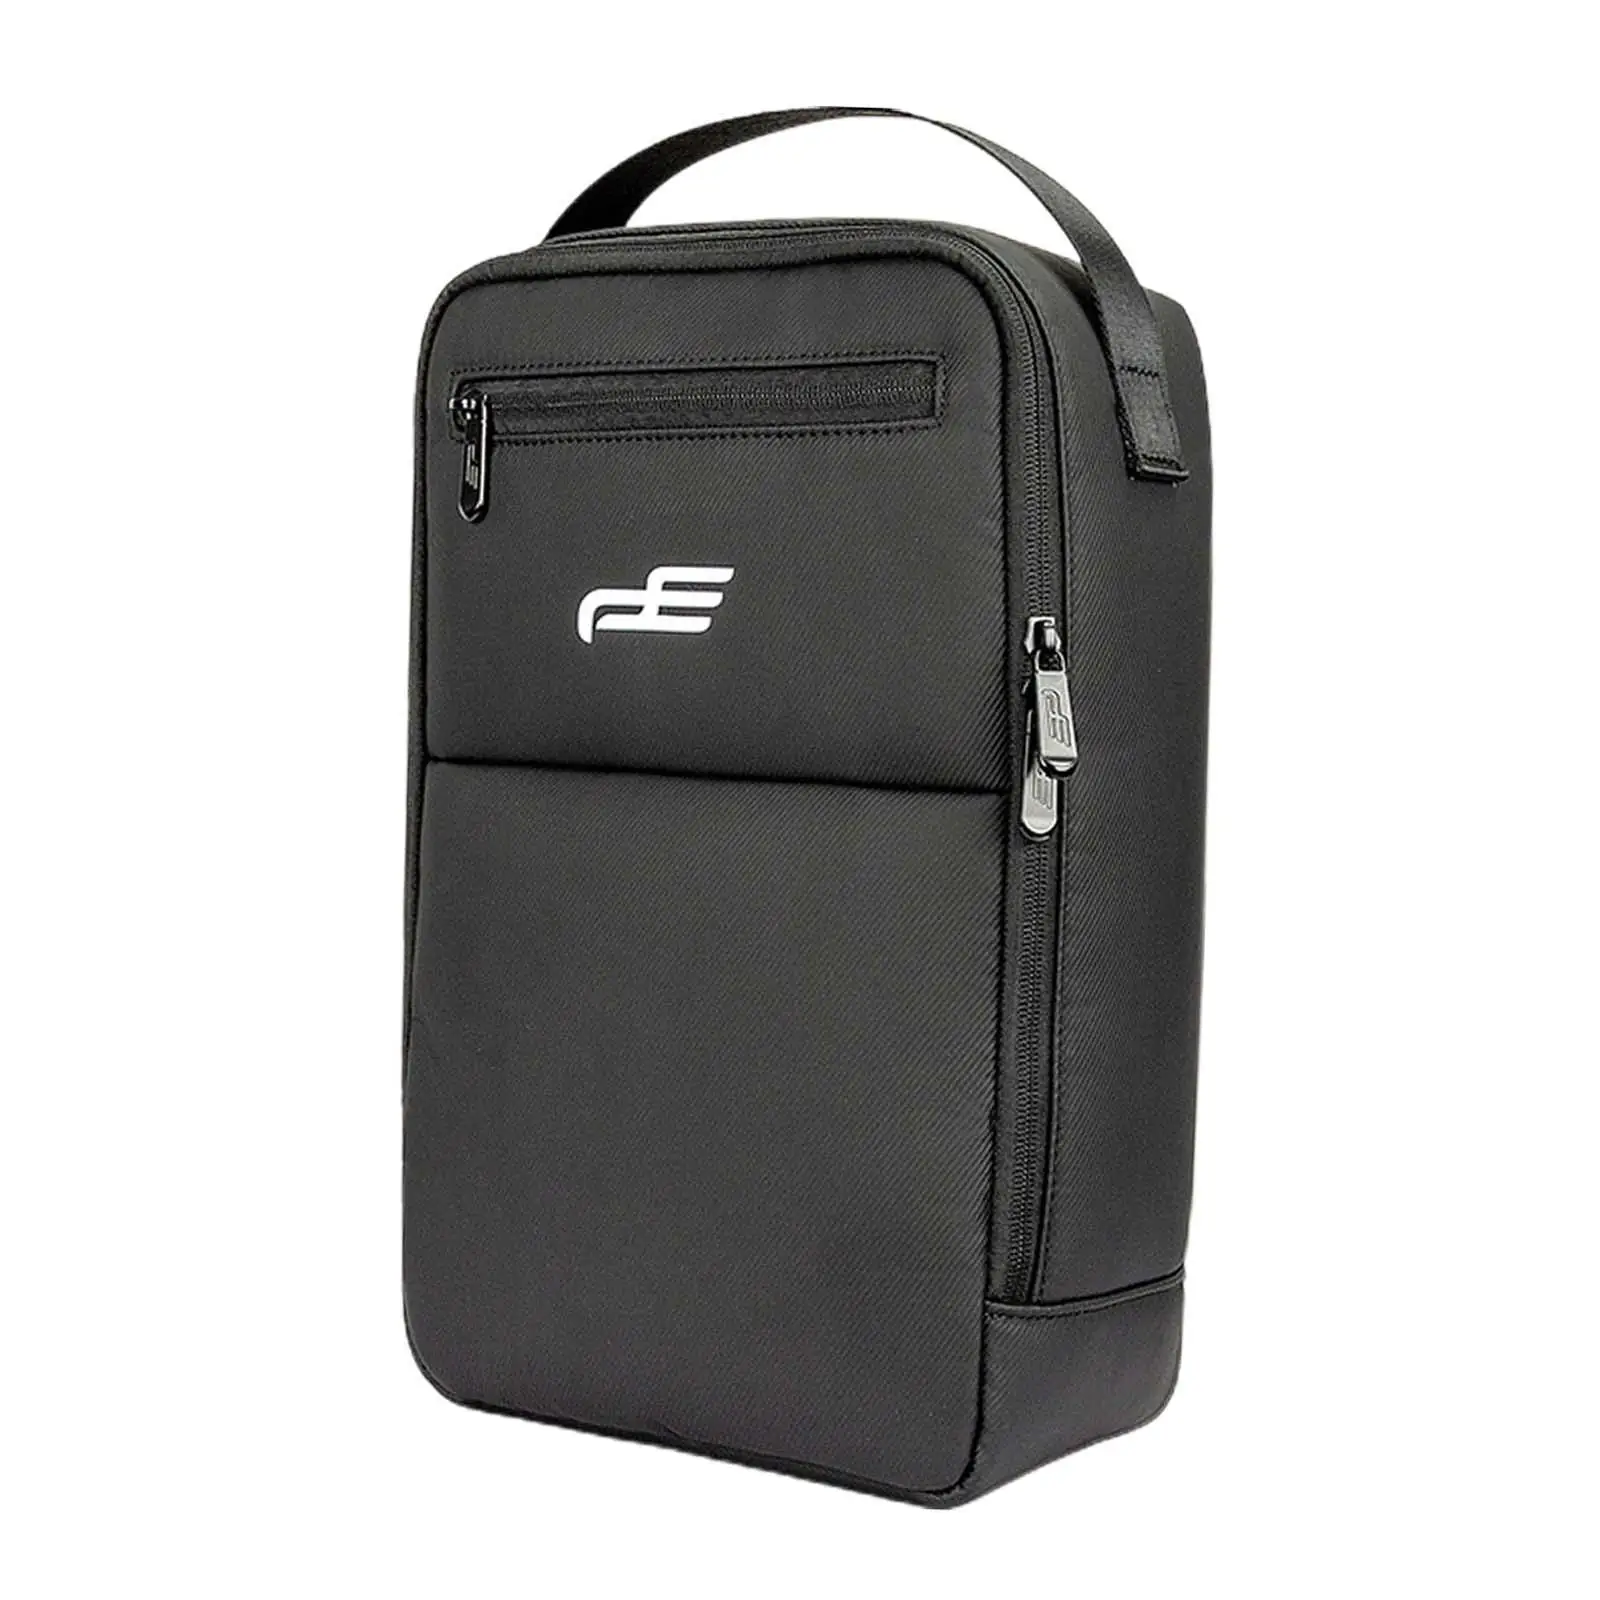 Golf Shoes Bag Durable Shoe Storage Bag with External Pocket for Accessories